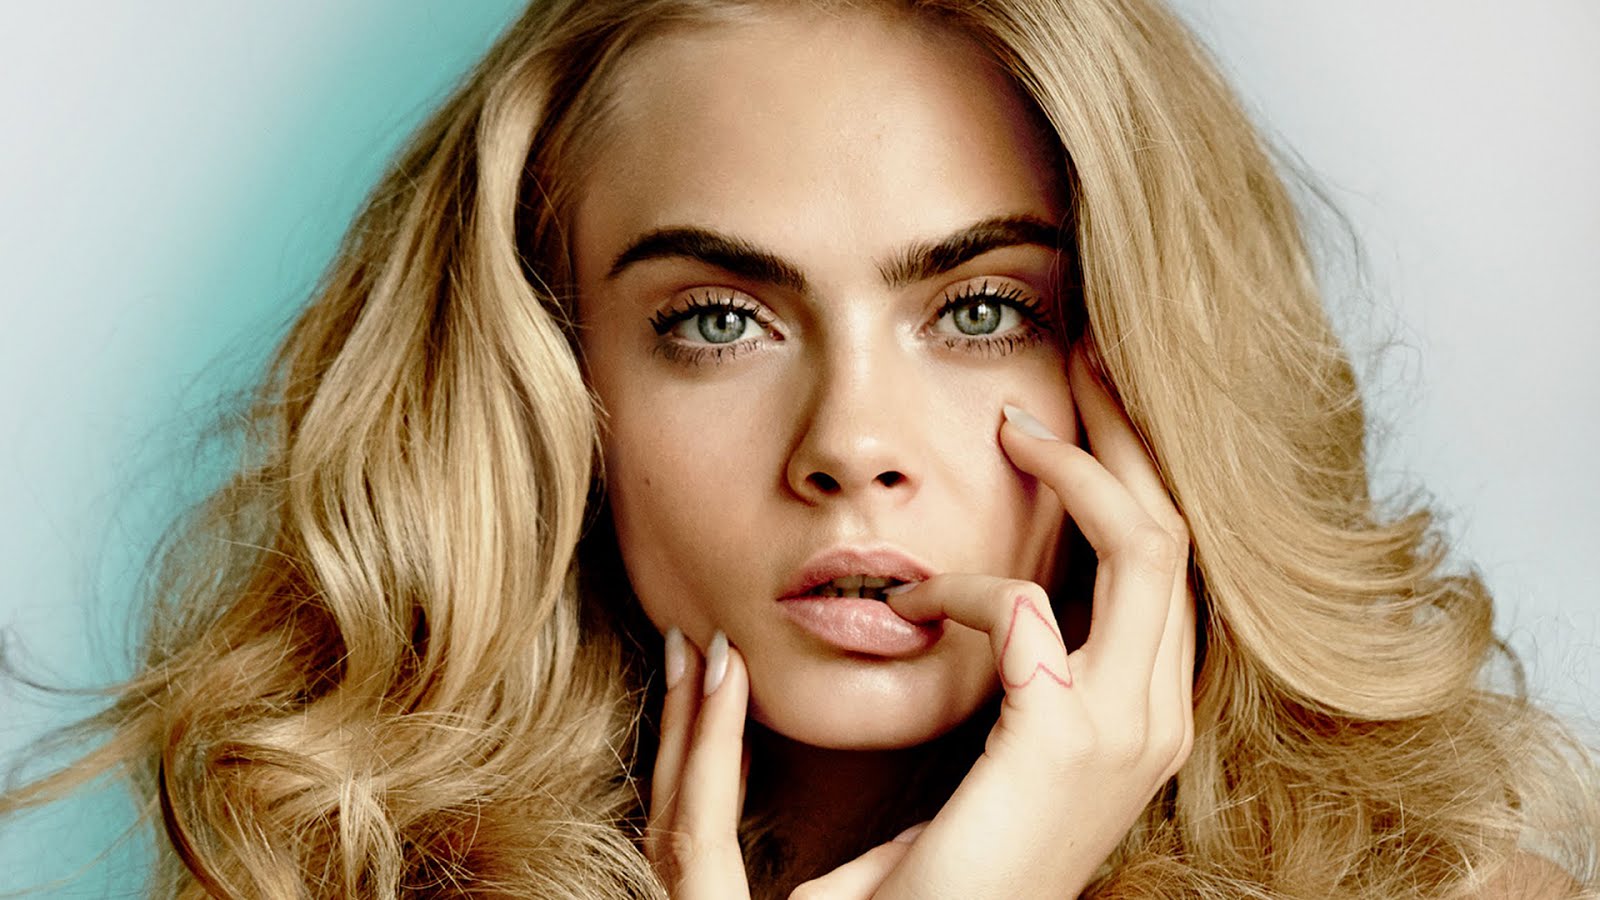 Cara Delevingne Photoshoot 2017 Wallpapers